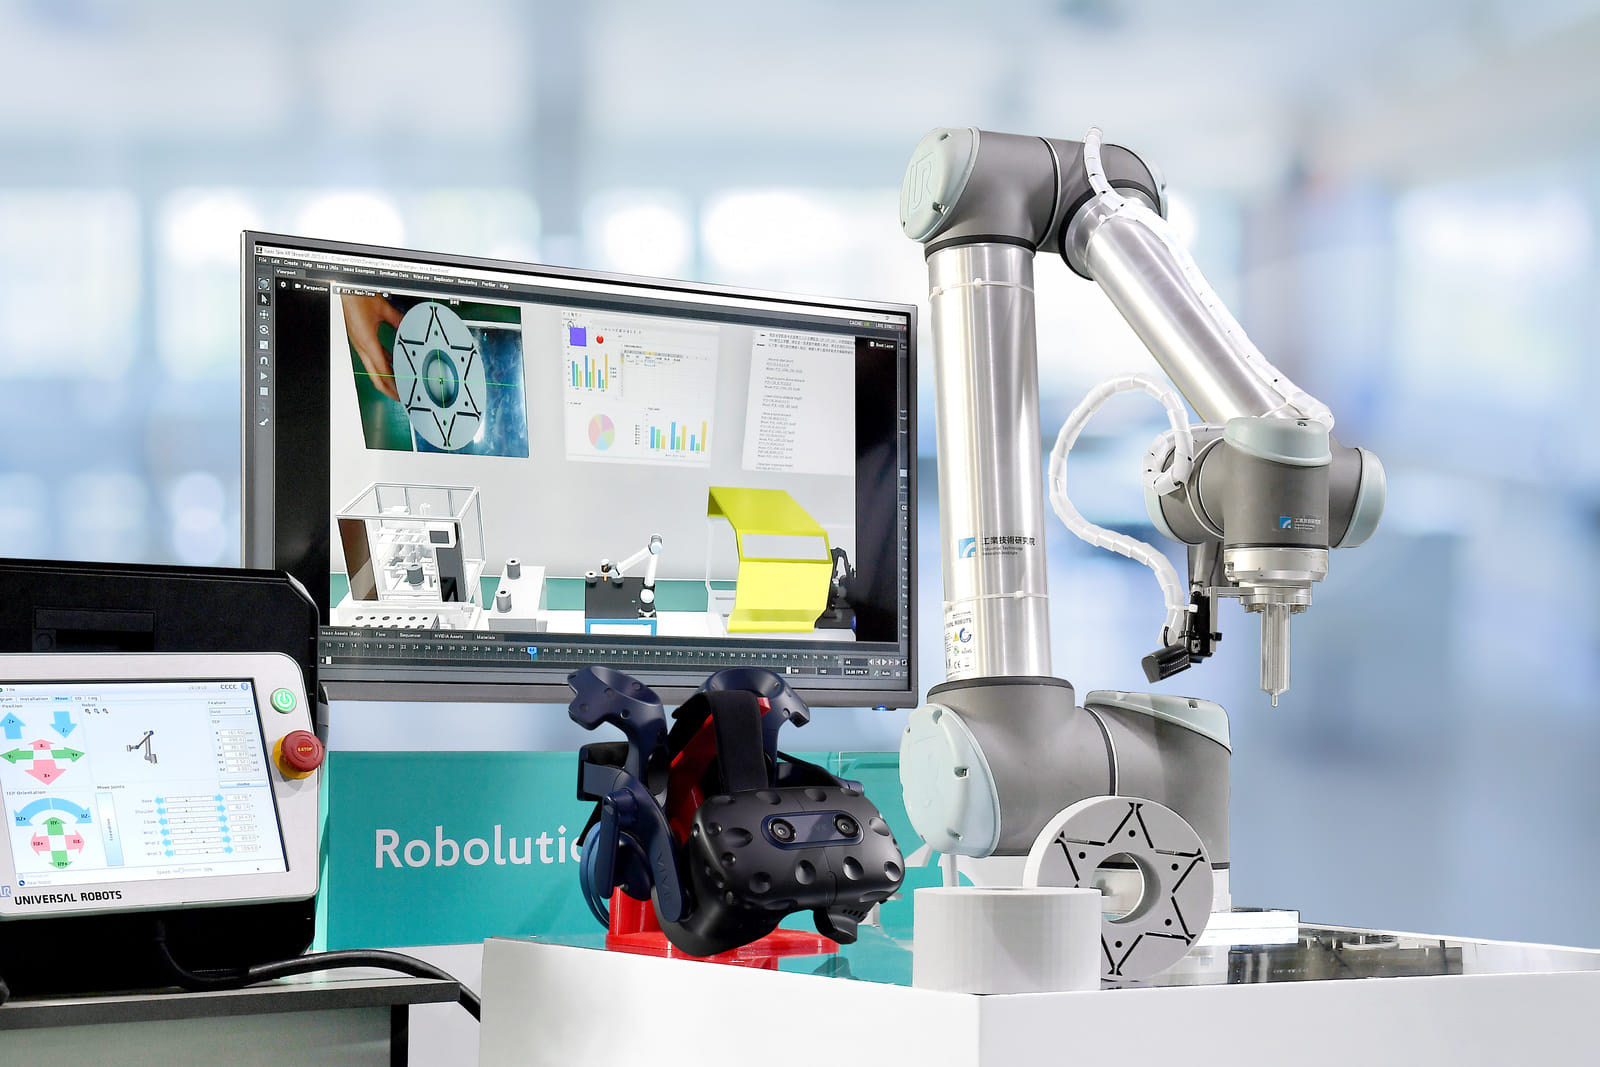 AI and Sim2Real technologies are adopted to create a realistic simulation of a manufacturing factory.